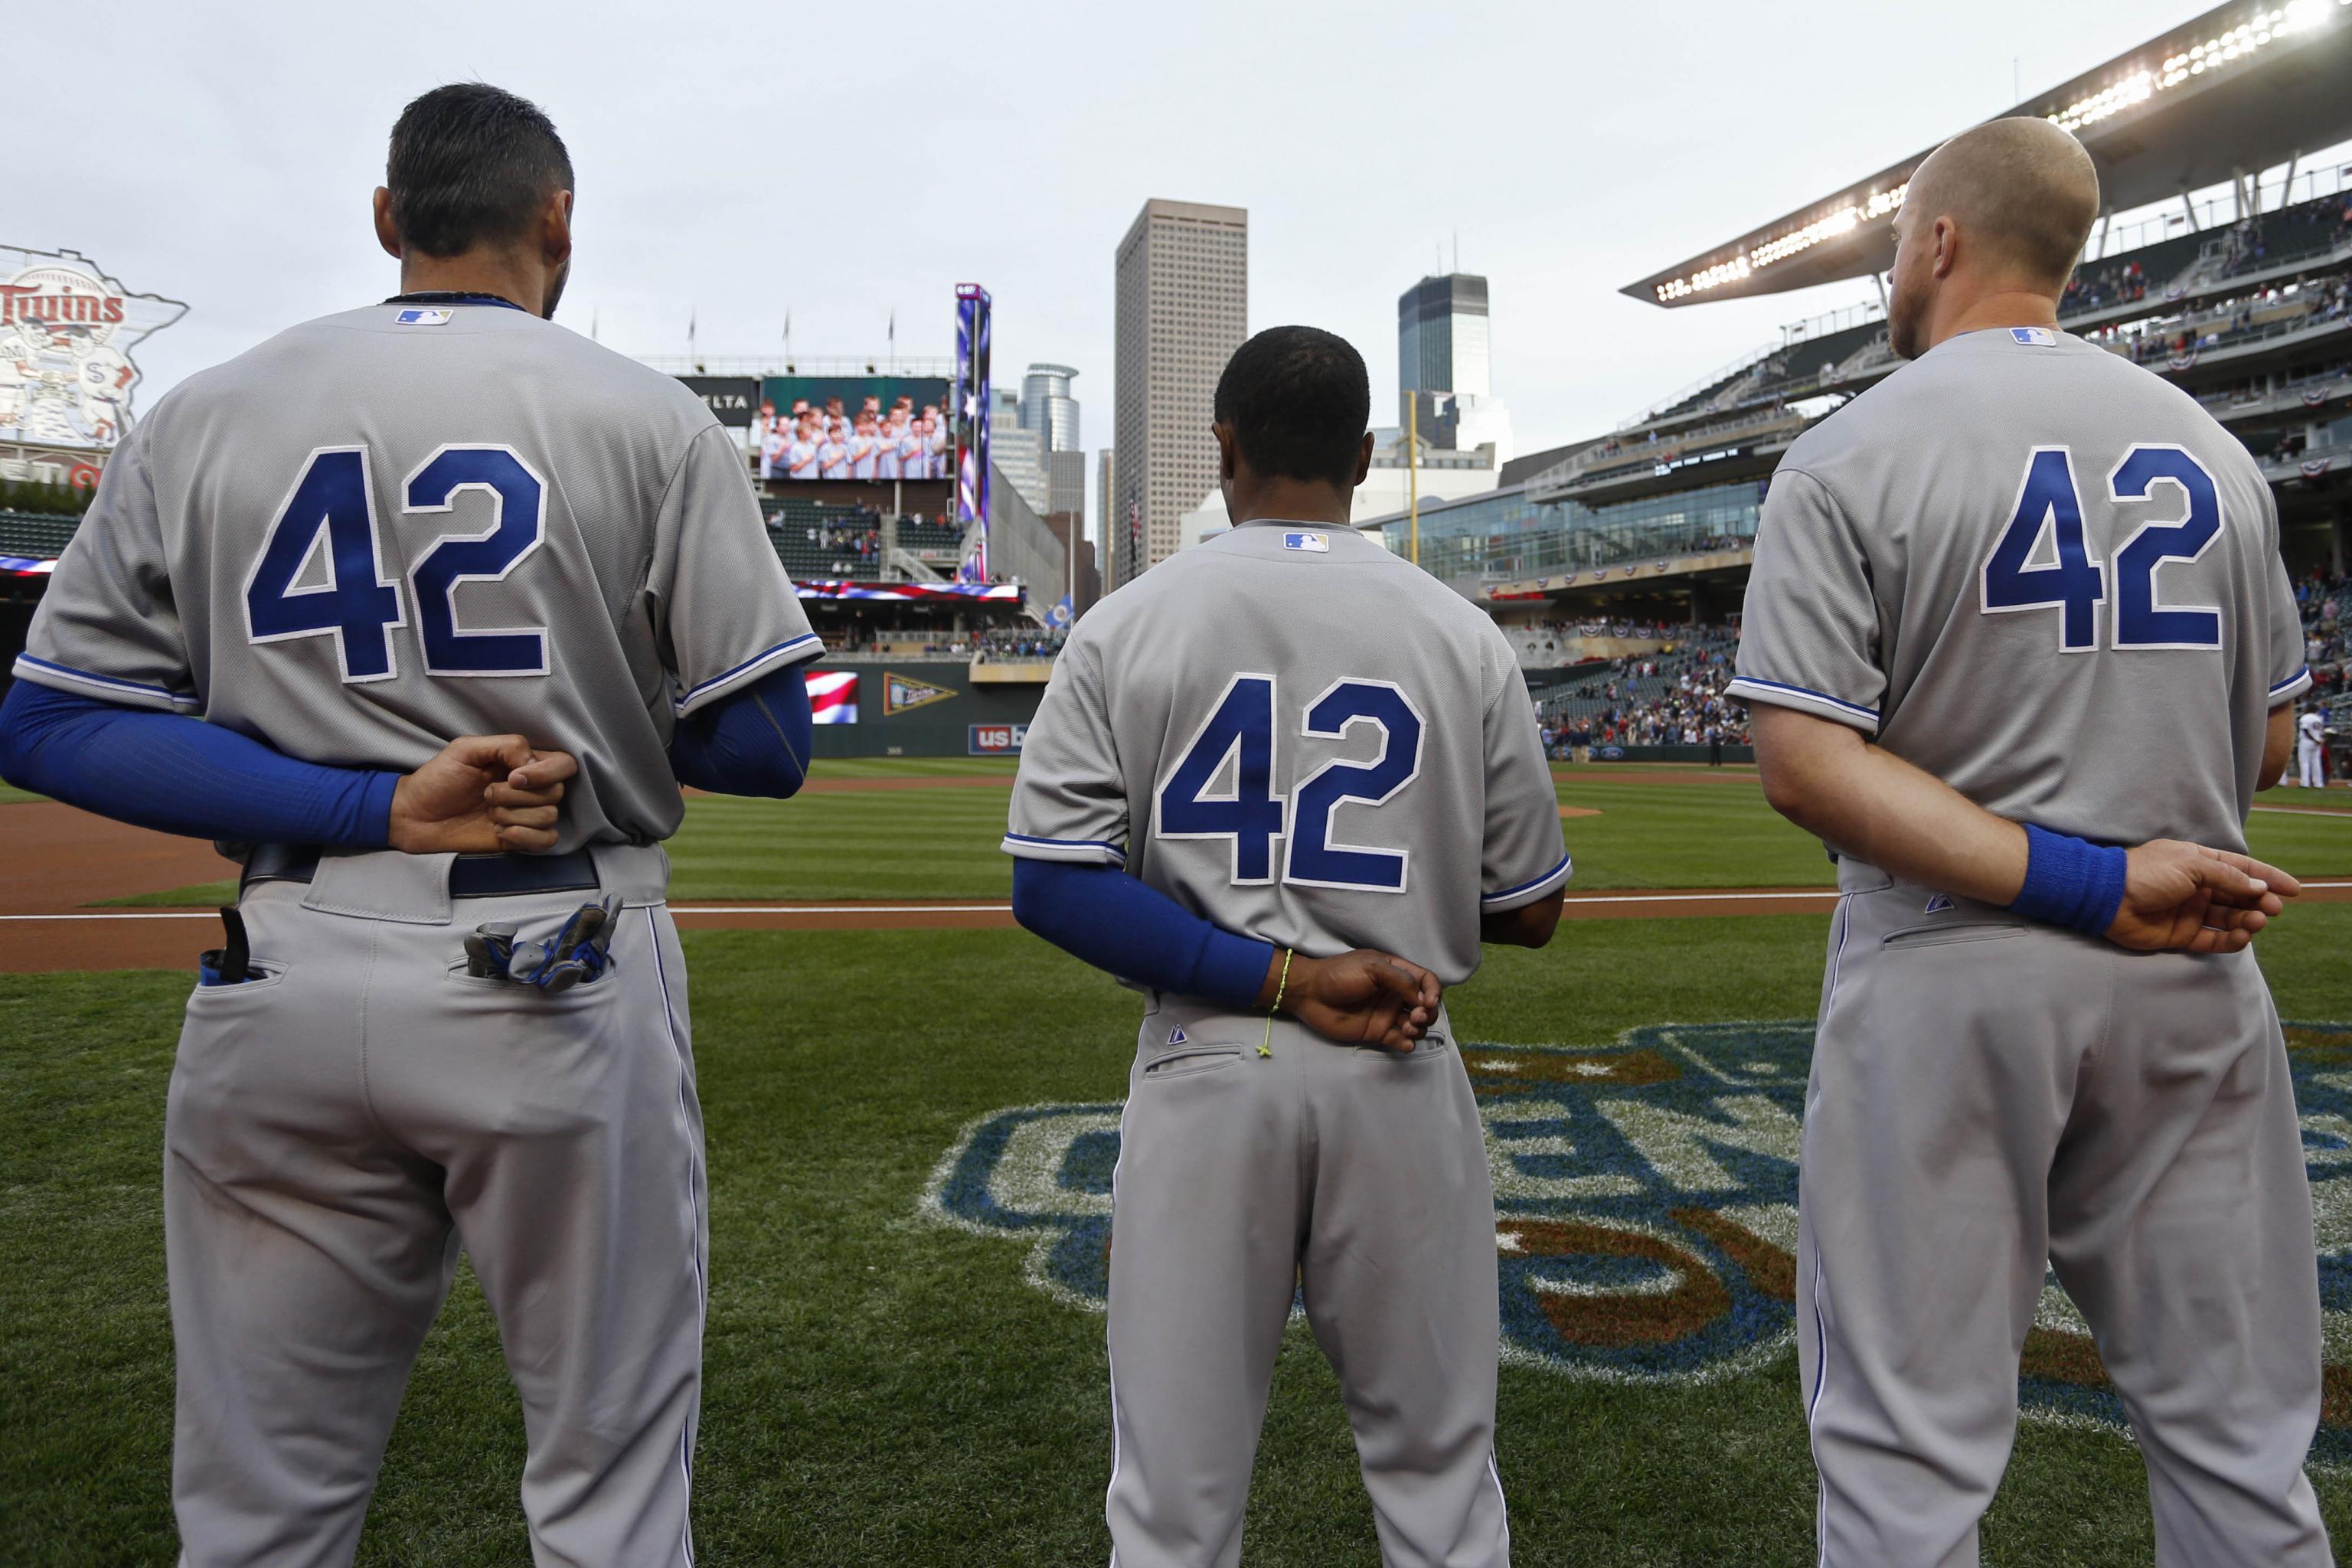 Honoring A Bruin Legend: Dodgers/MLB Celebrate Jackie Robinson Day